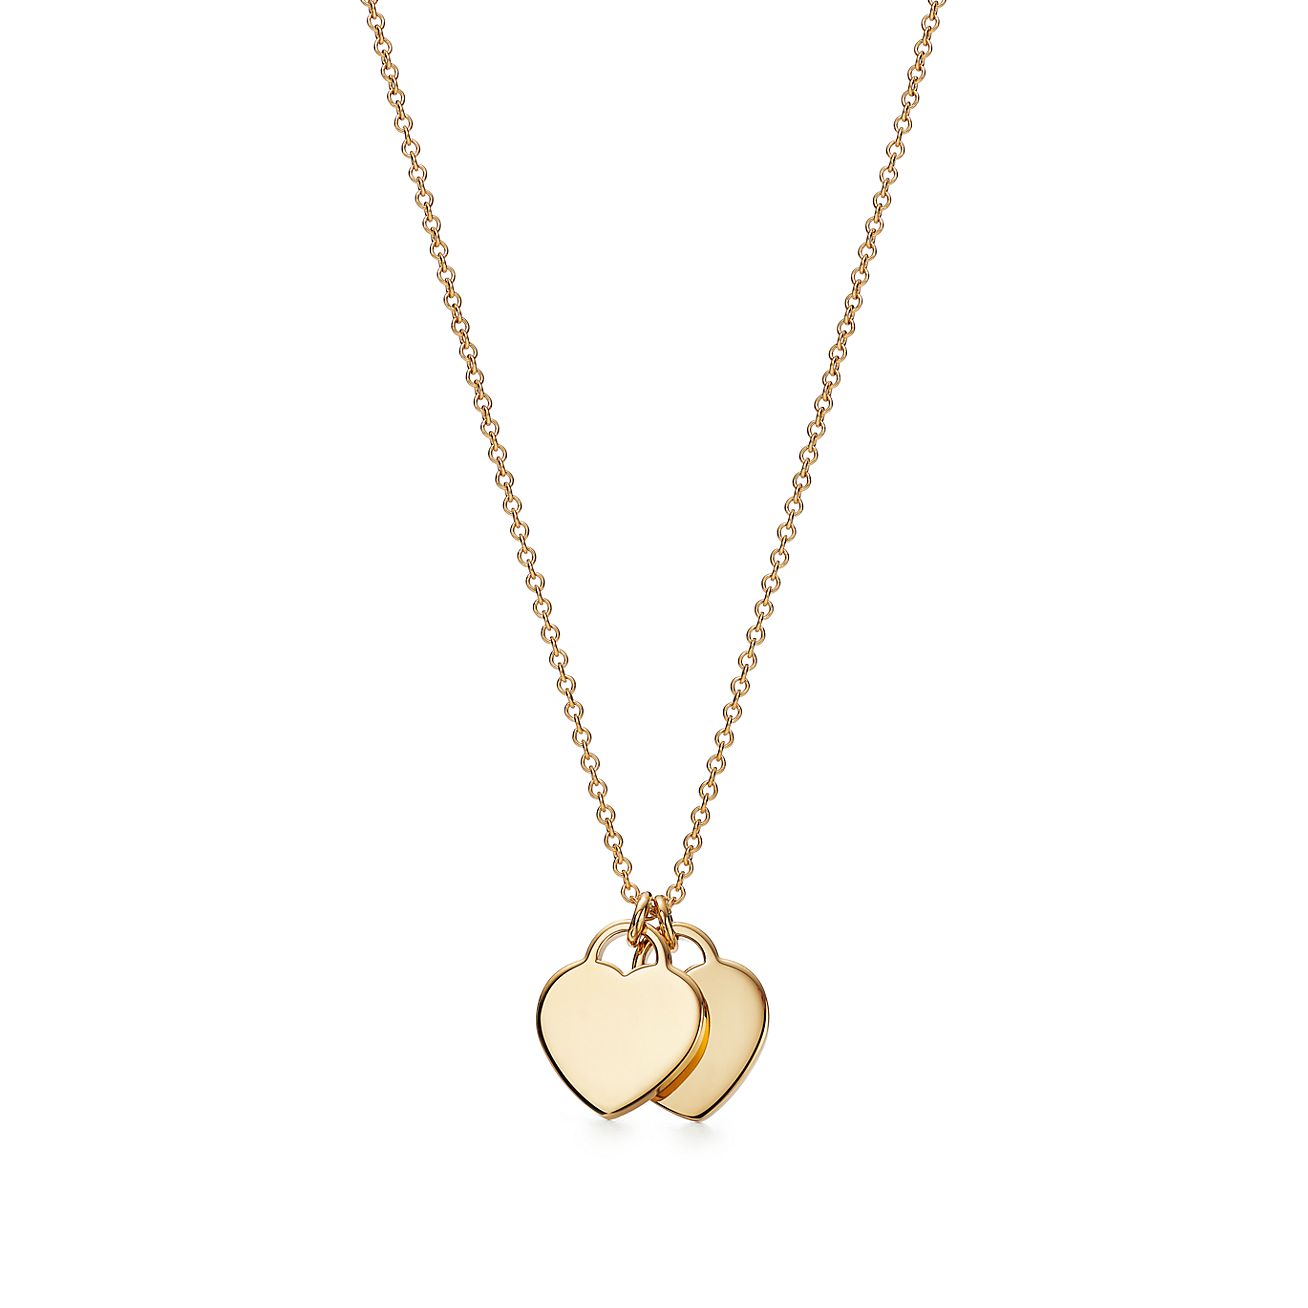 Double Heart Intertwined Necklace in Gold & Silver, Linked Love Hearts